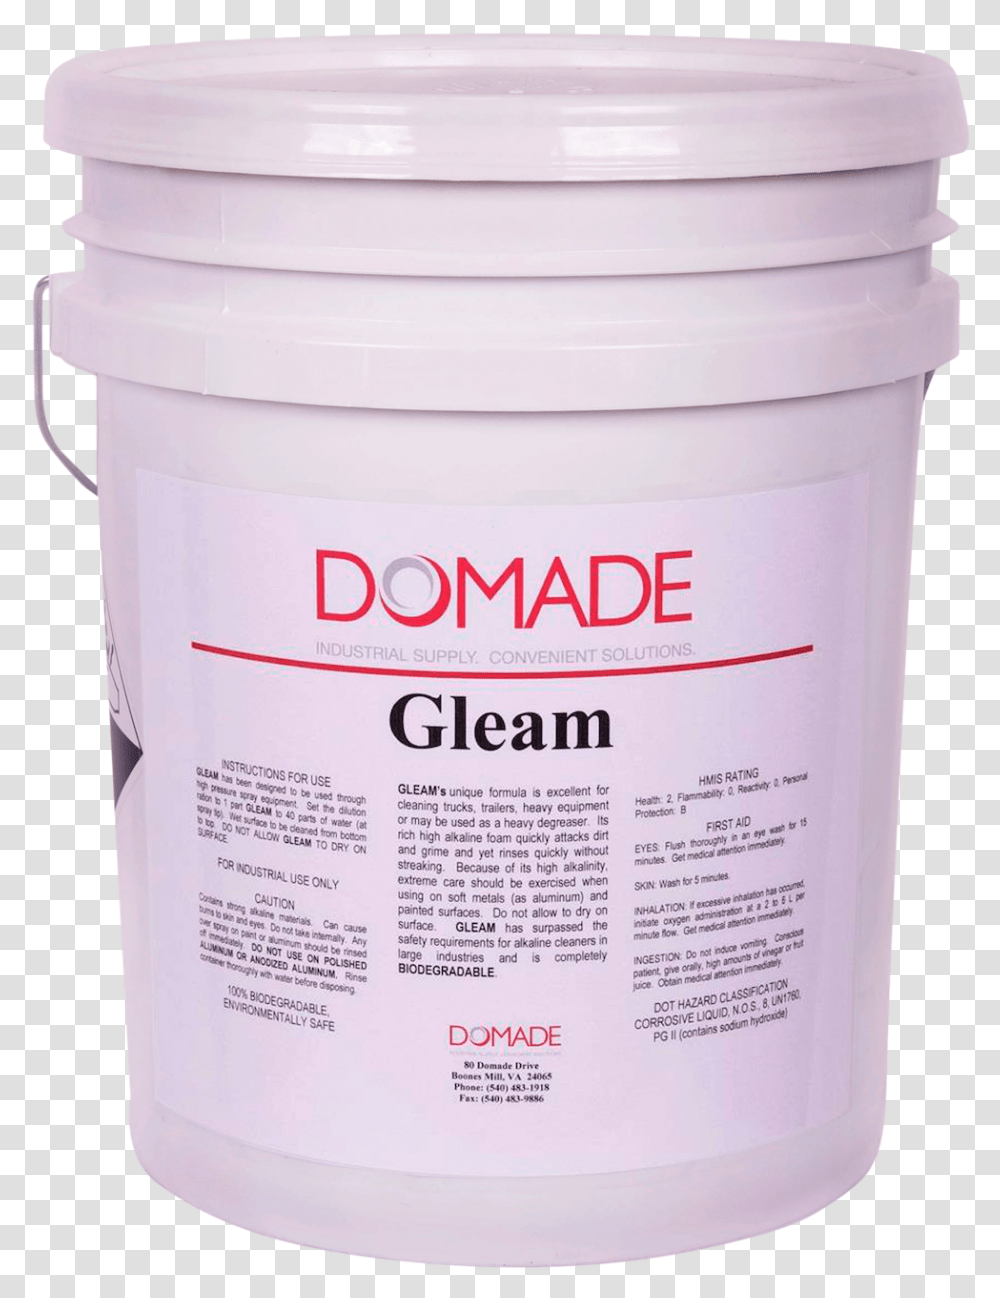 Domade Gleam Hd Alkaline Cleanerdegreaser 6 Gal Plastic, Paint Container, Bucket, Mailbox, Letterbox Transparent Png